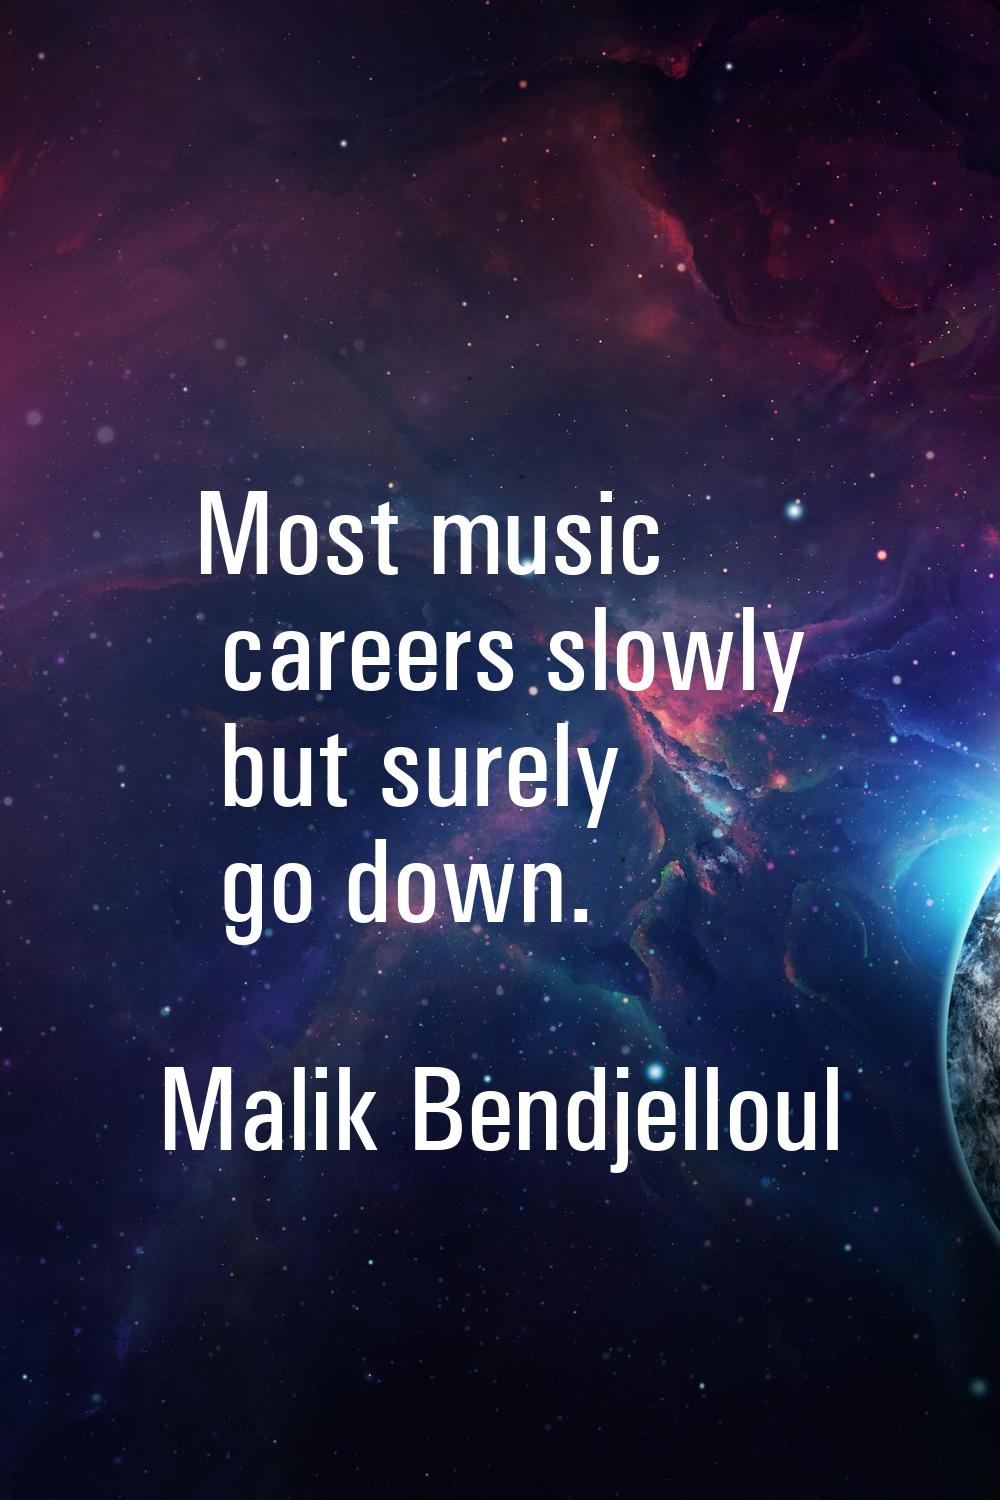 Most music careers slowly but surely go down.